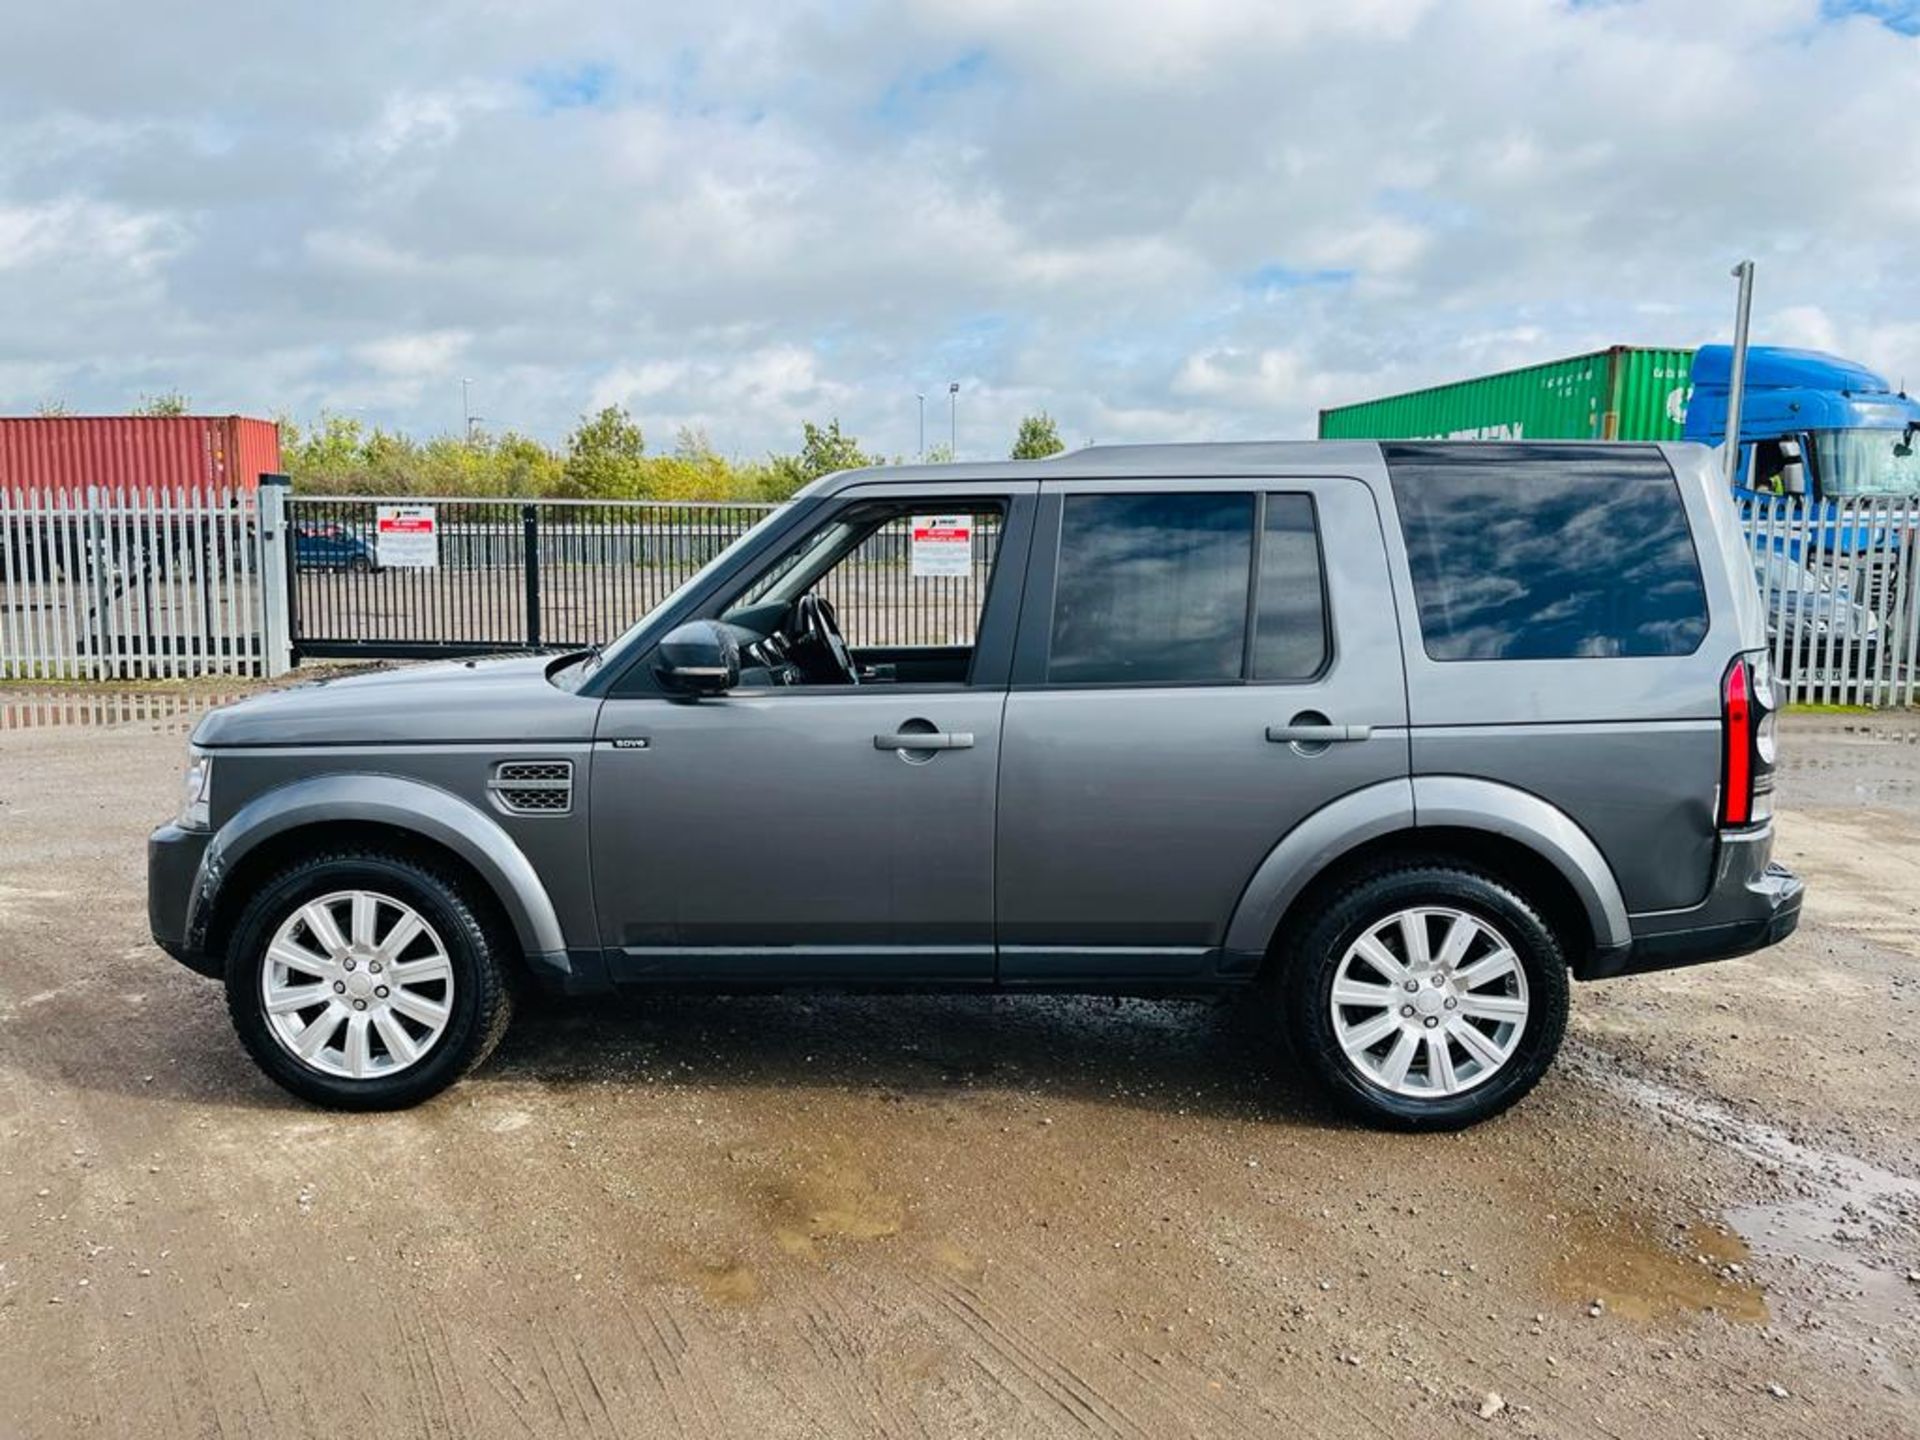 Land Rover Discovery 4 3.0 SDV6 XS CommandShift 2014 '14 Reg' Sat Nav - A/C - 4WD - Commercial - Image 13 of 31